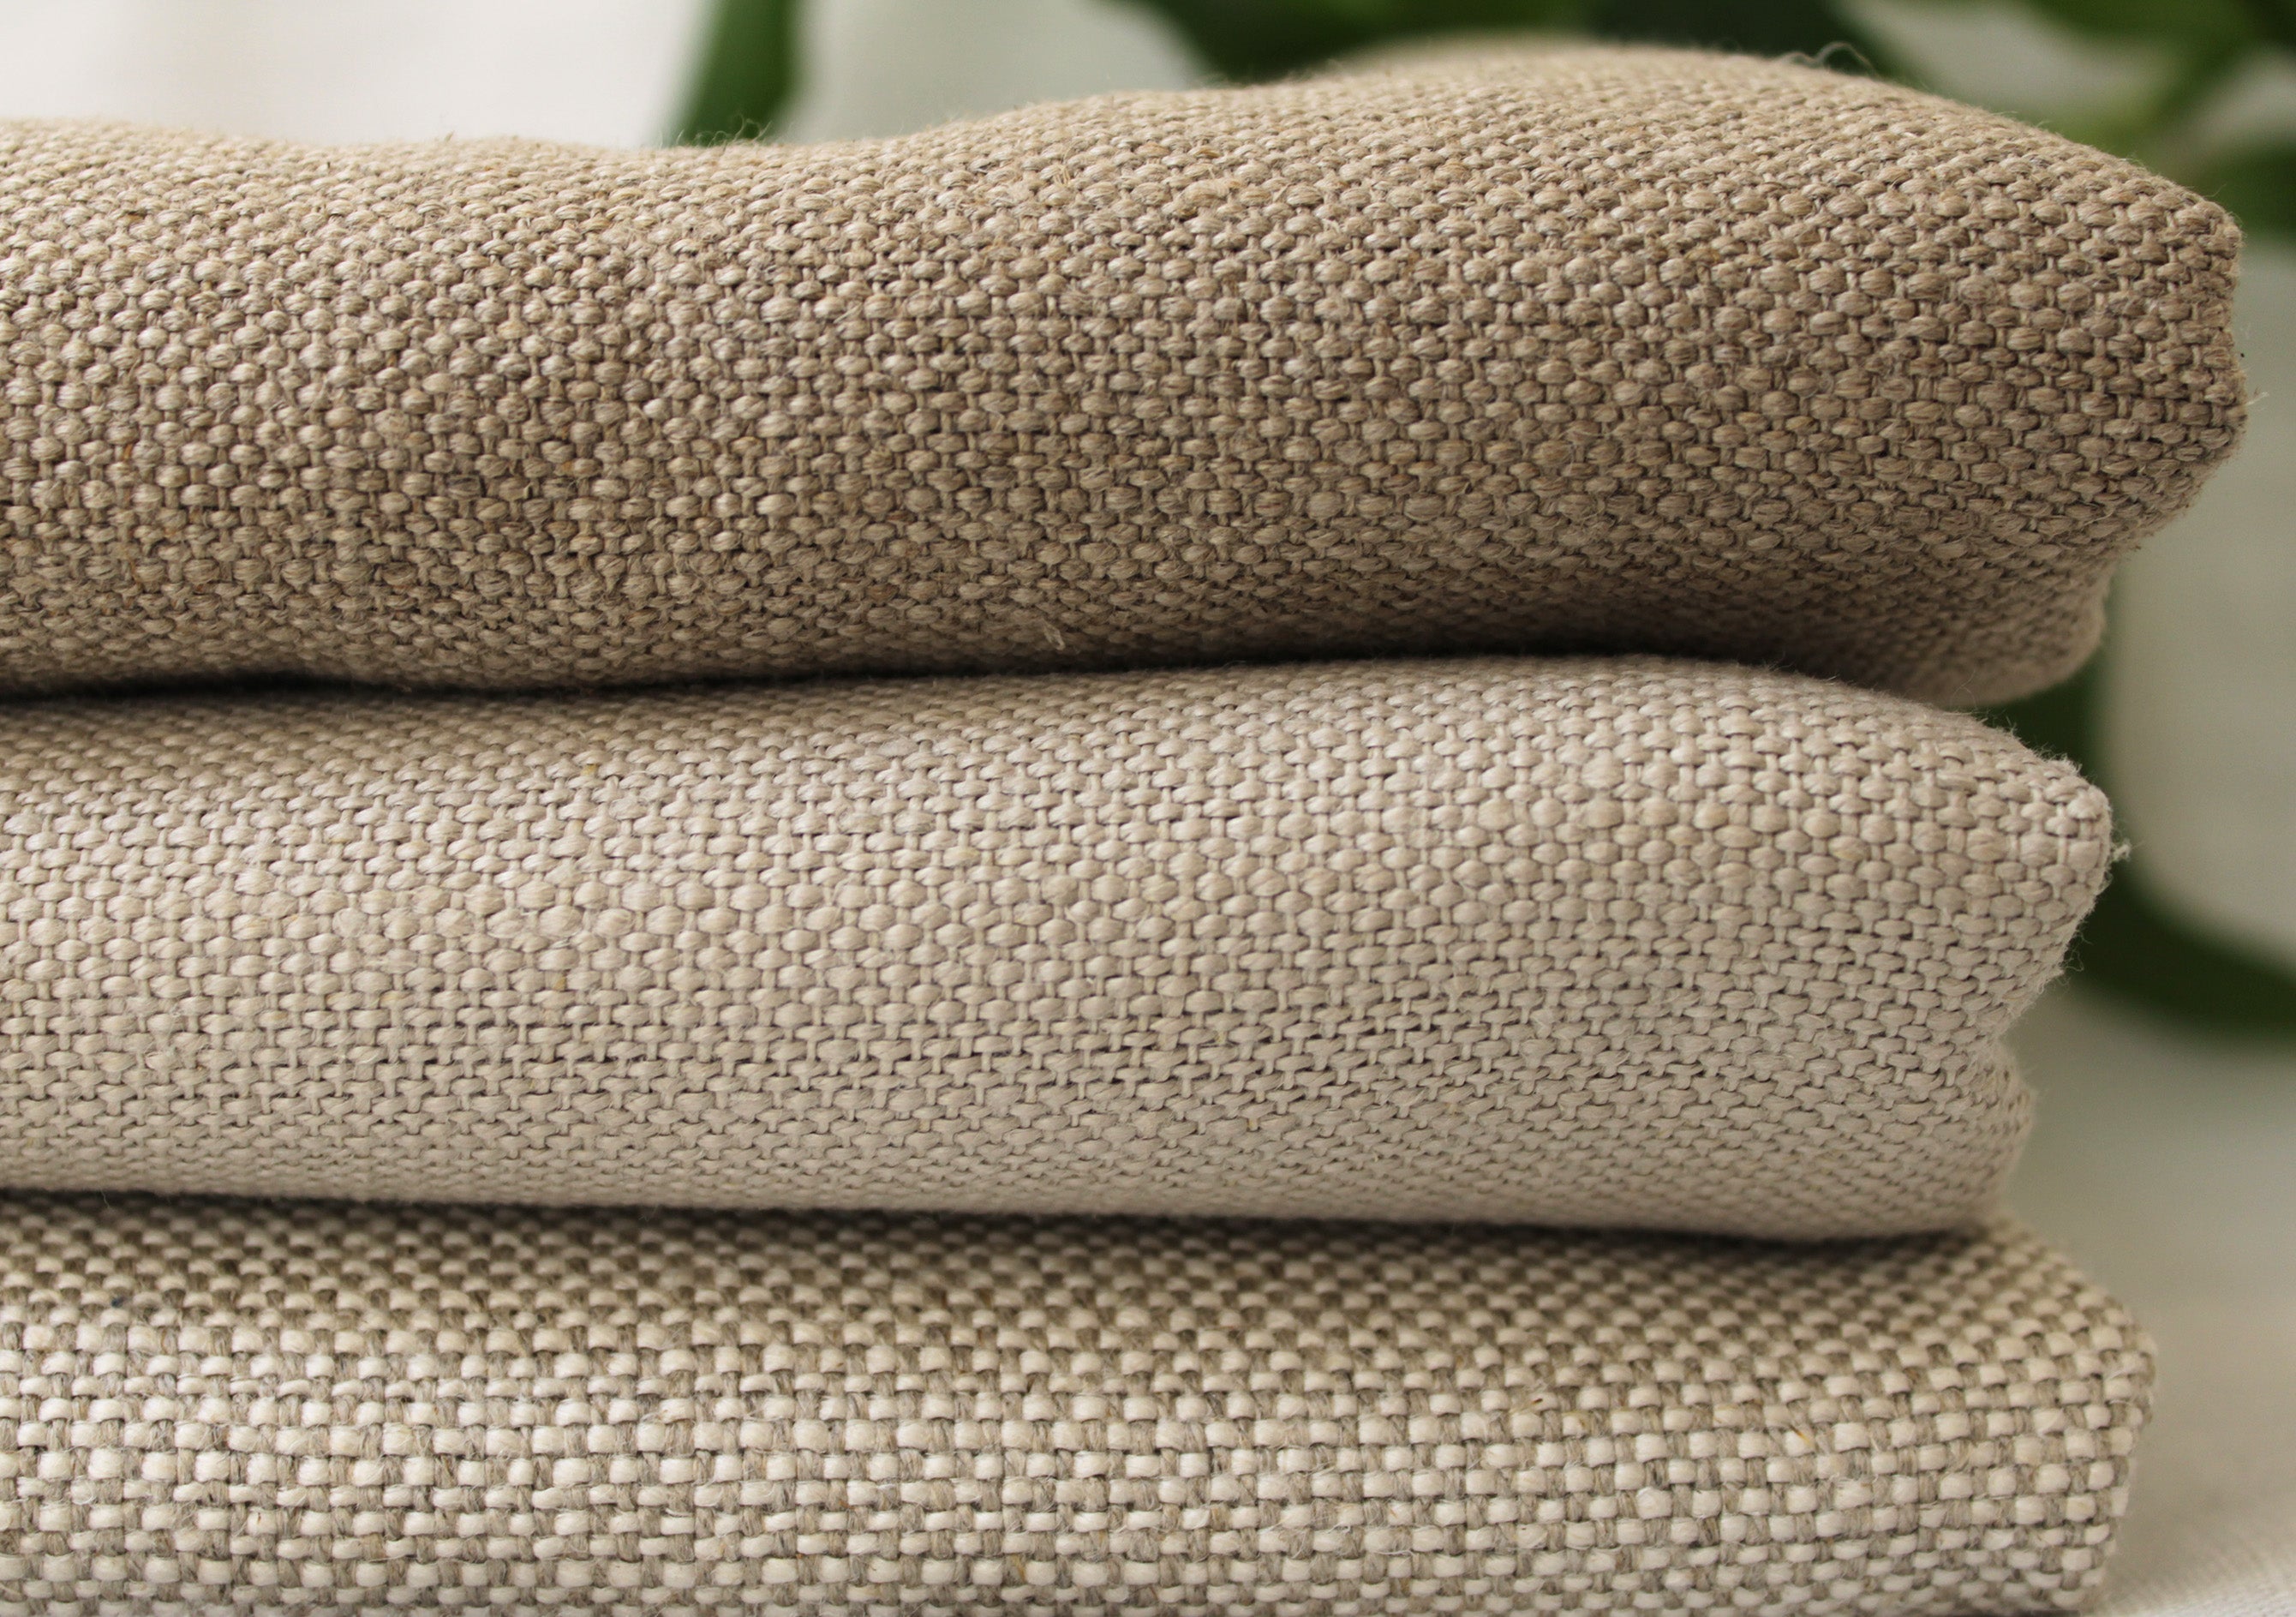 WHOLESALE Upholstery Linen Fabric / Heavyweight Linen Fabric by the yard